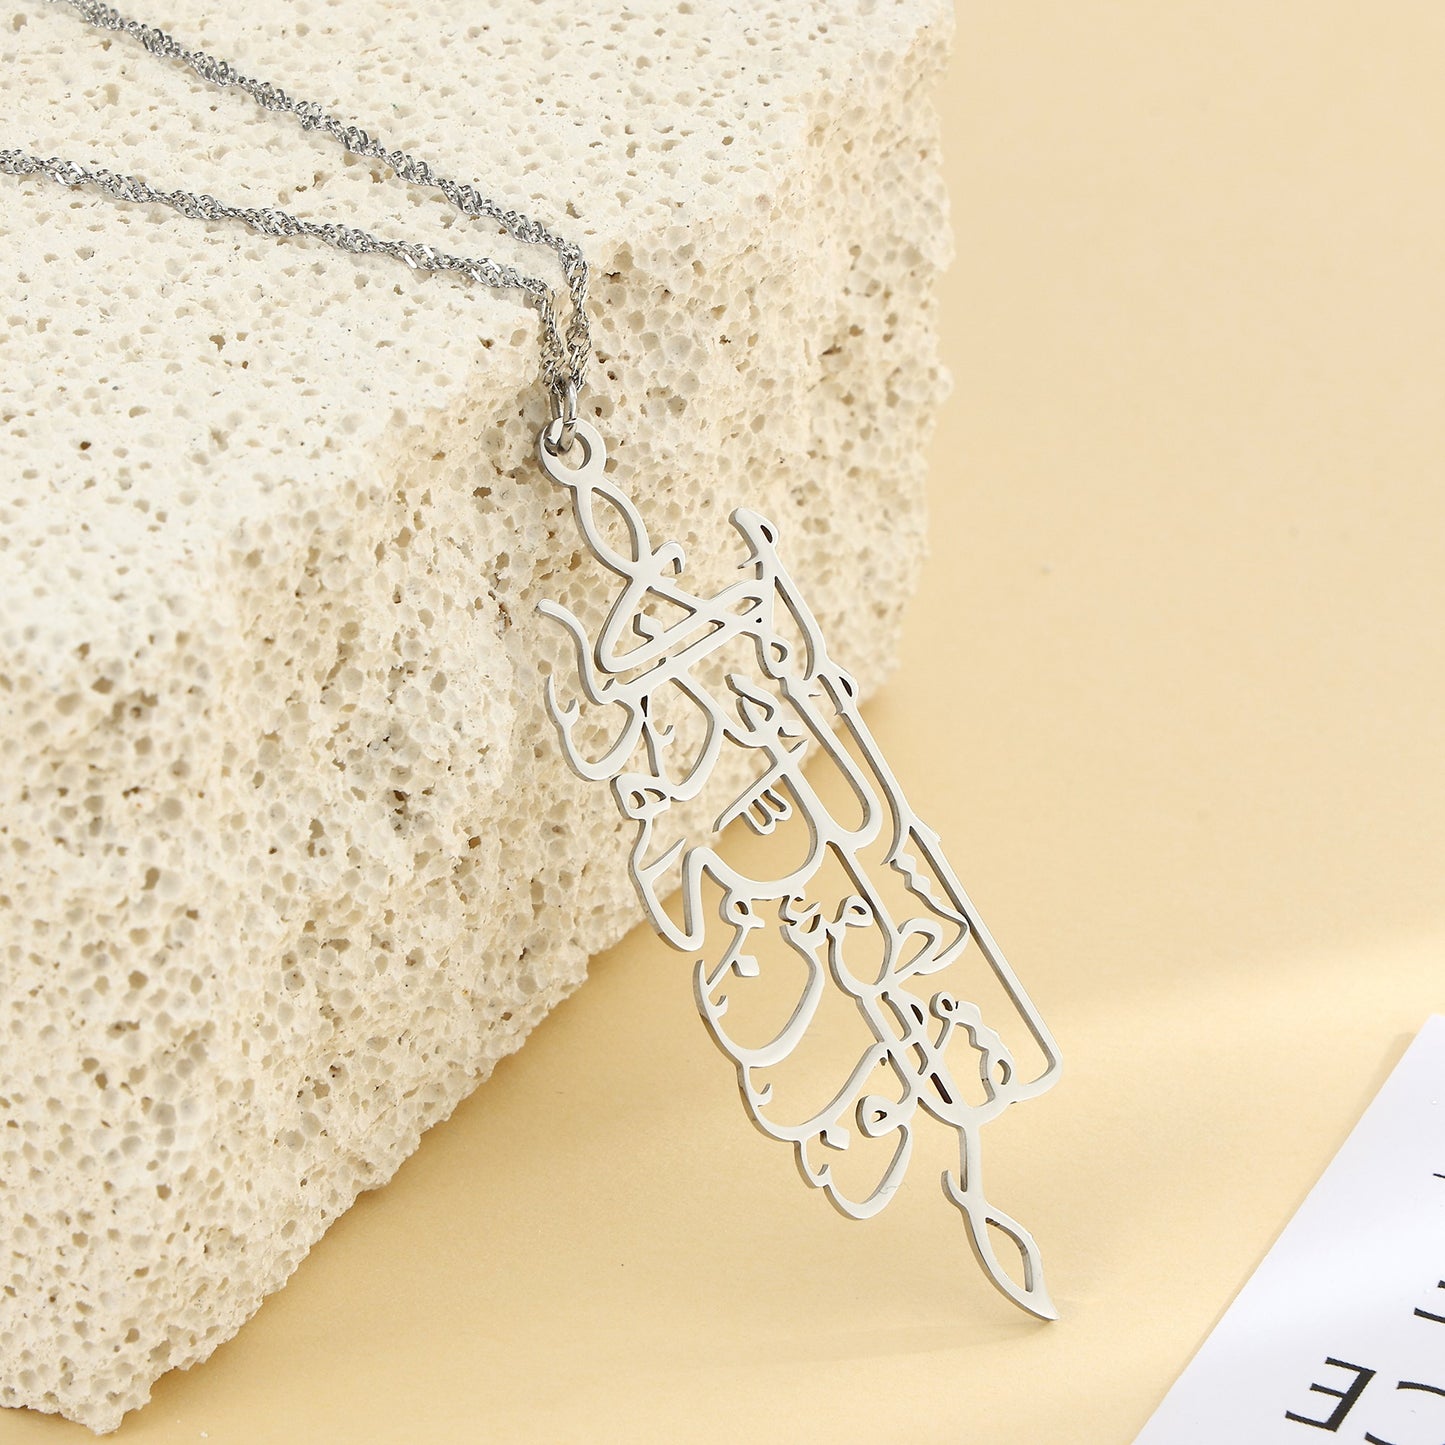 "Only in the remembrance of Allah will your hearts find peace" necklace